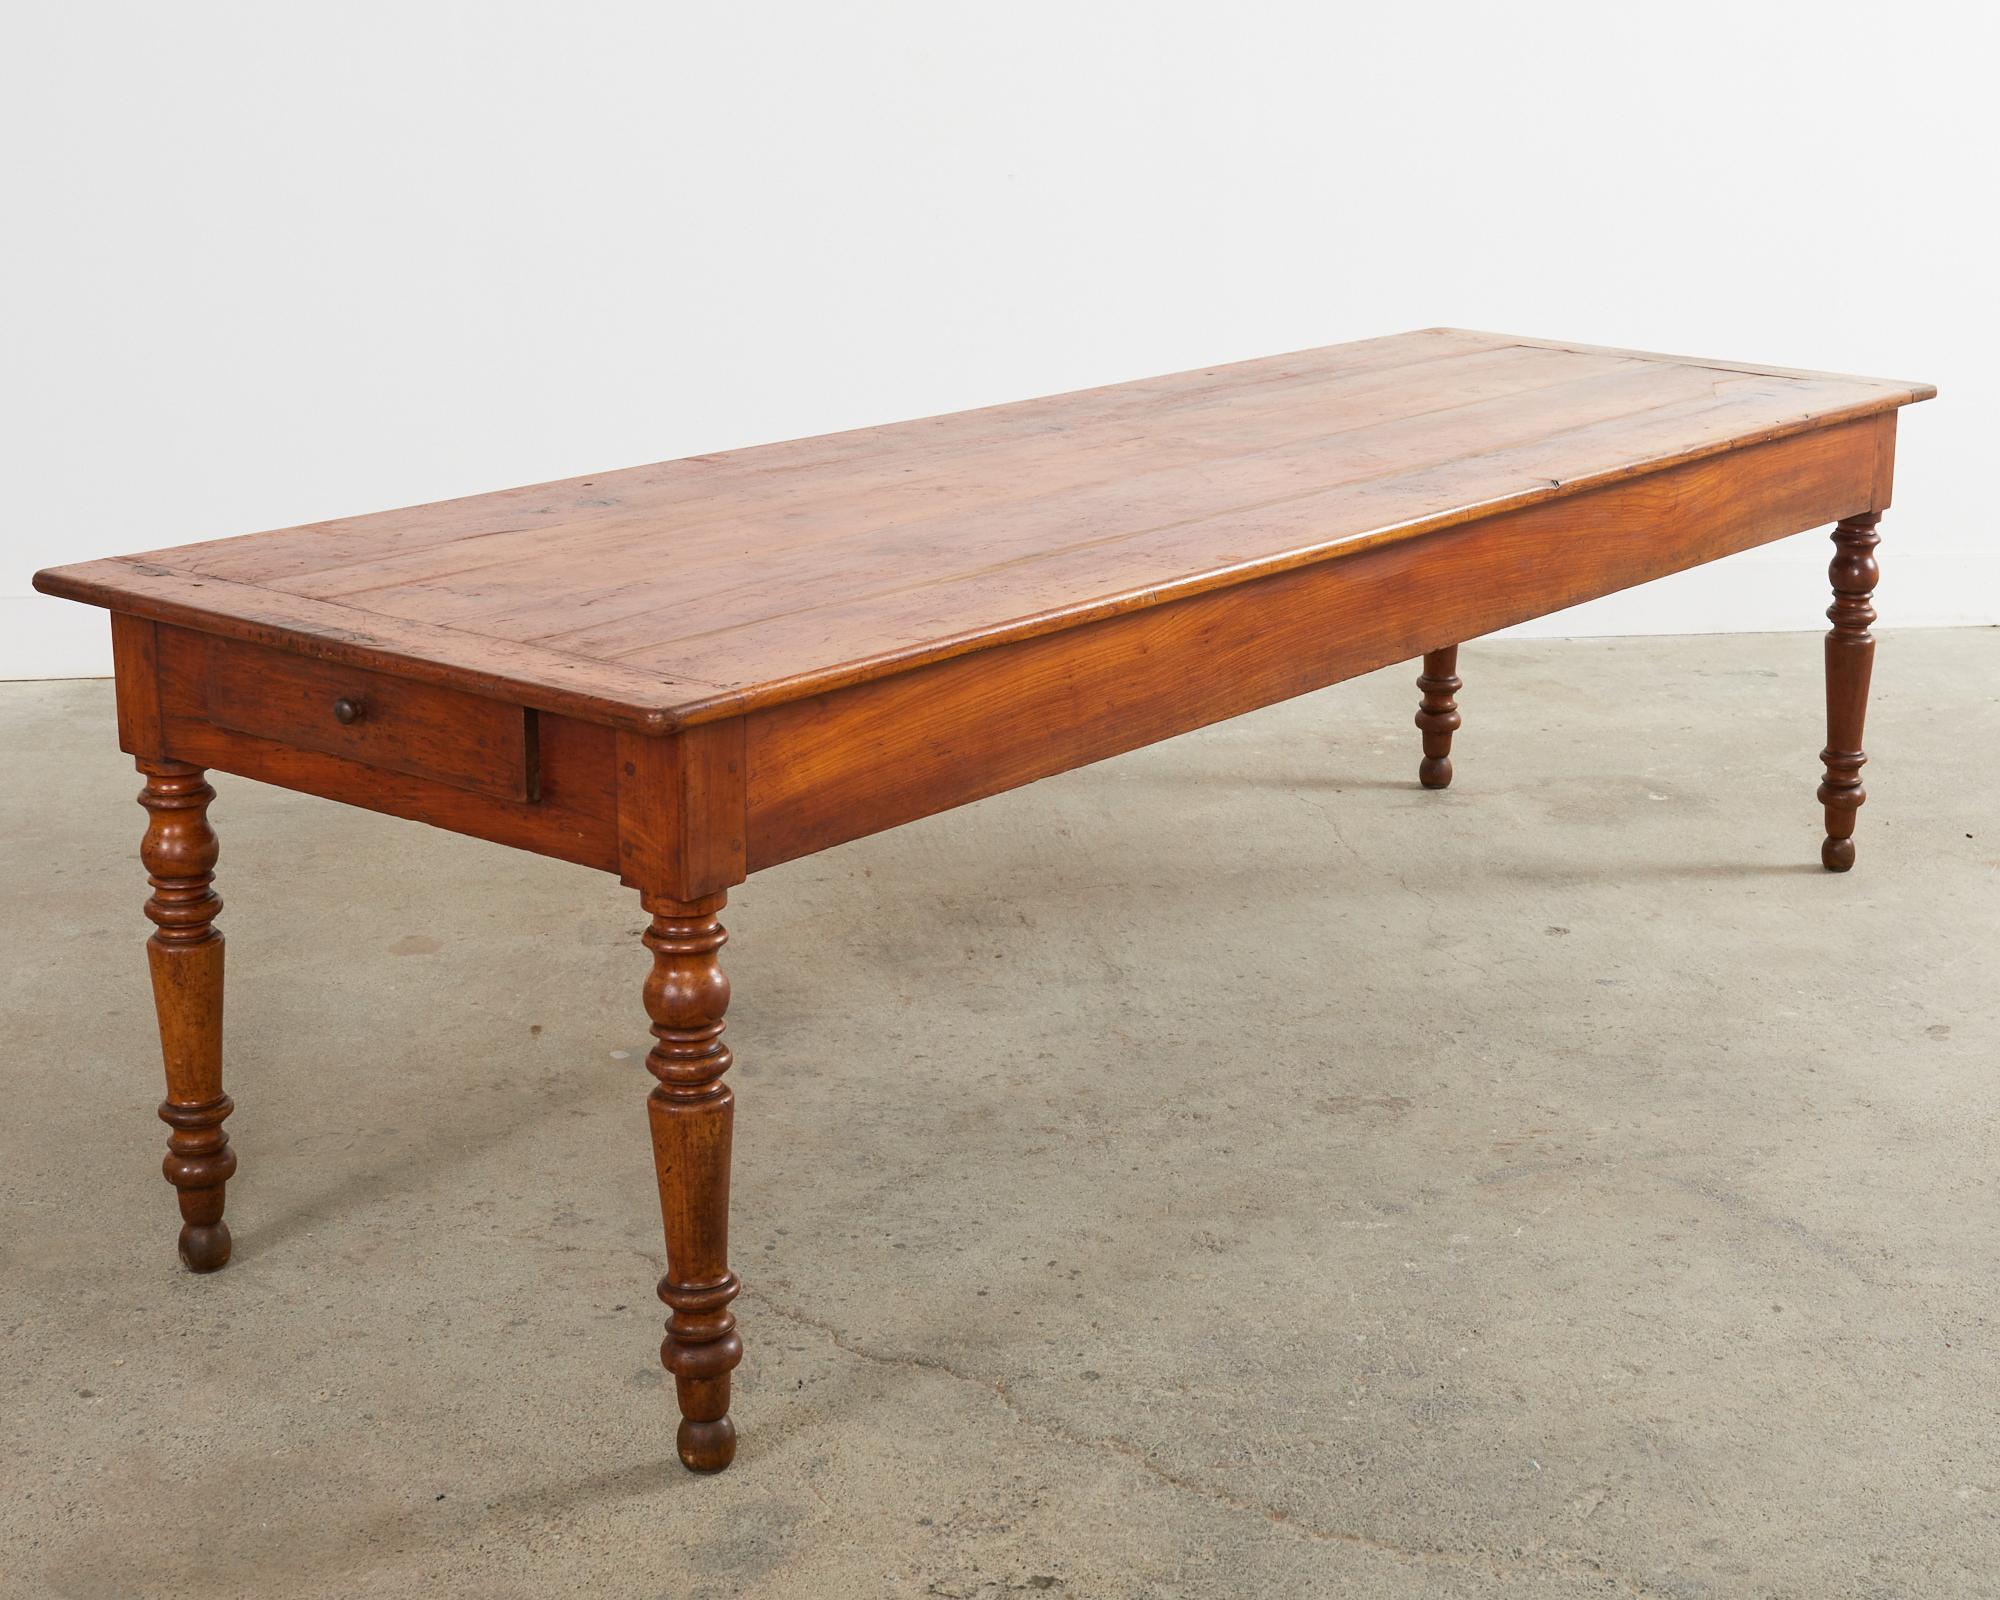 Hand-Crafted 19th Century Country French Provincial Fruitwood Farmhouse Harvest Table